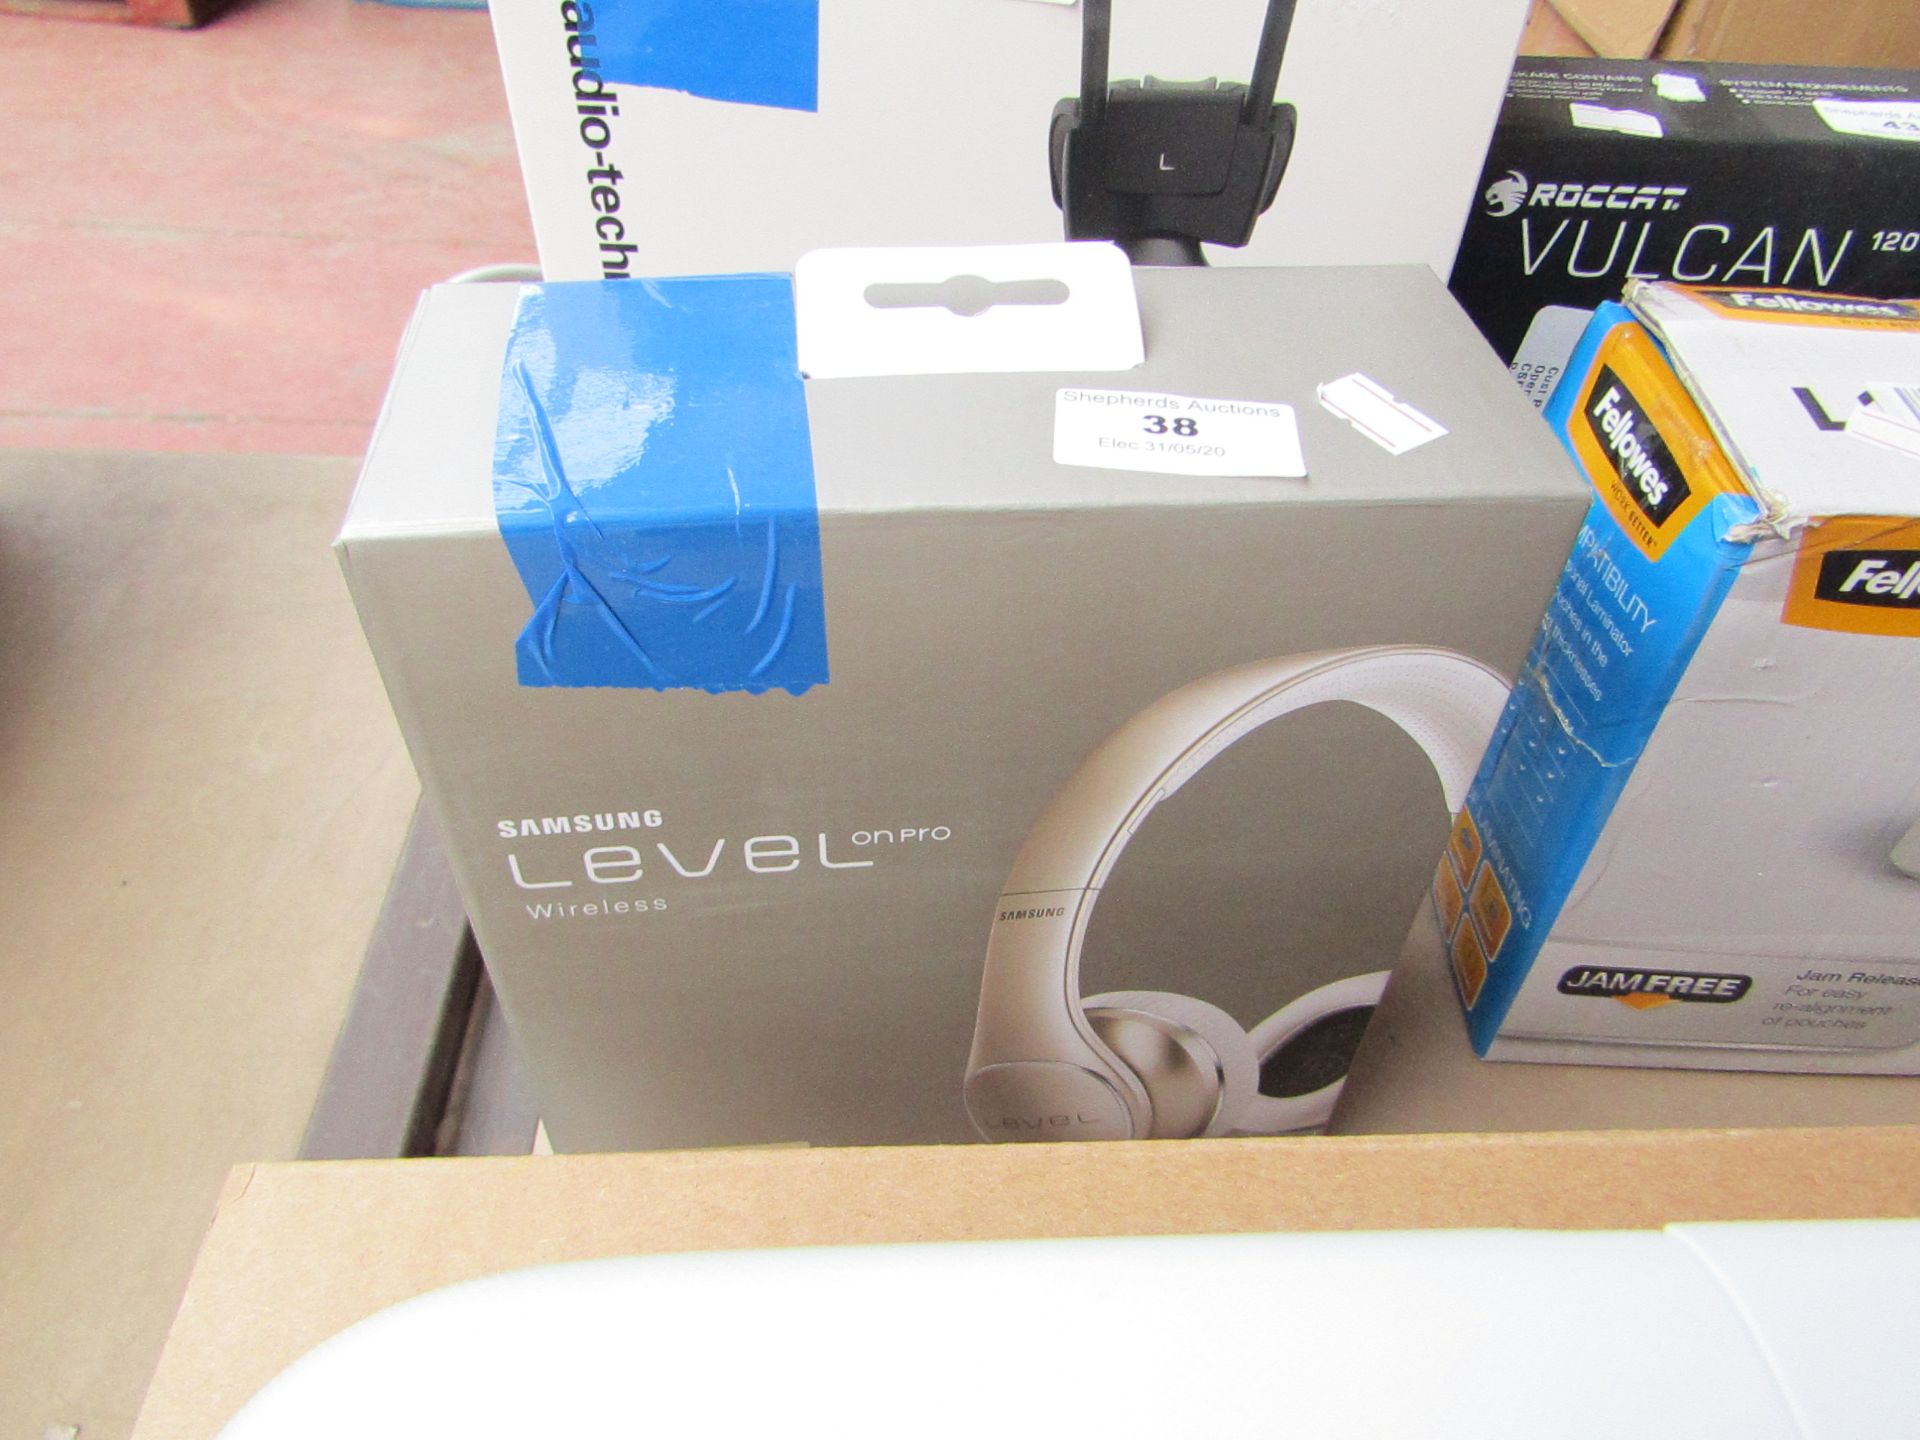 Samsung Level On Pro wireless headphones, tested working and boxed. RRP £246.91